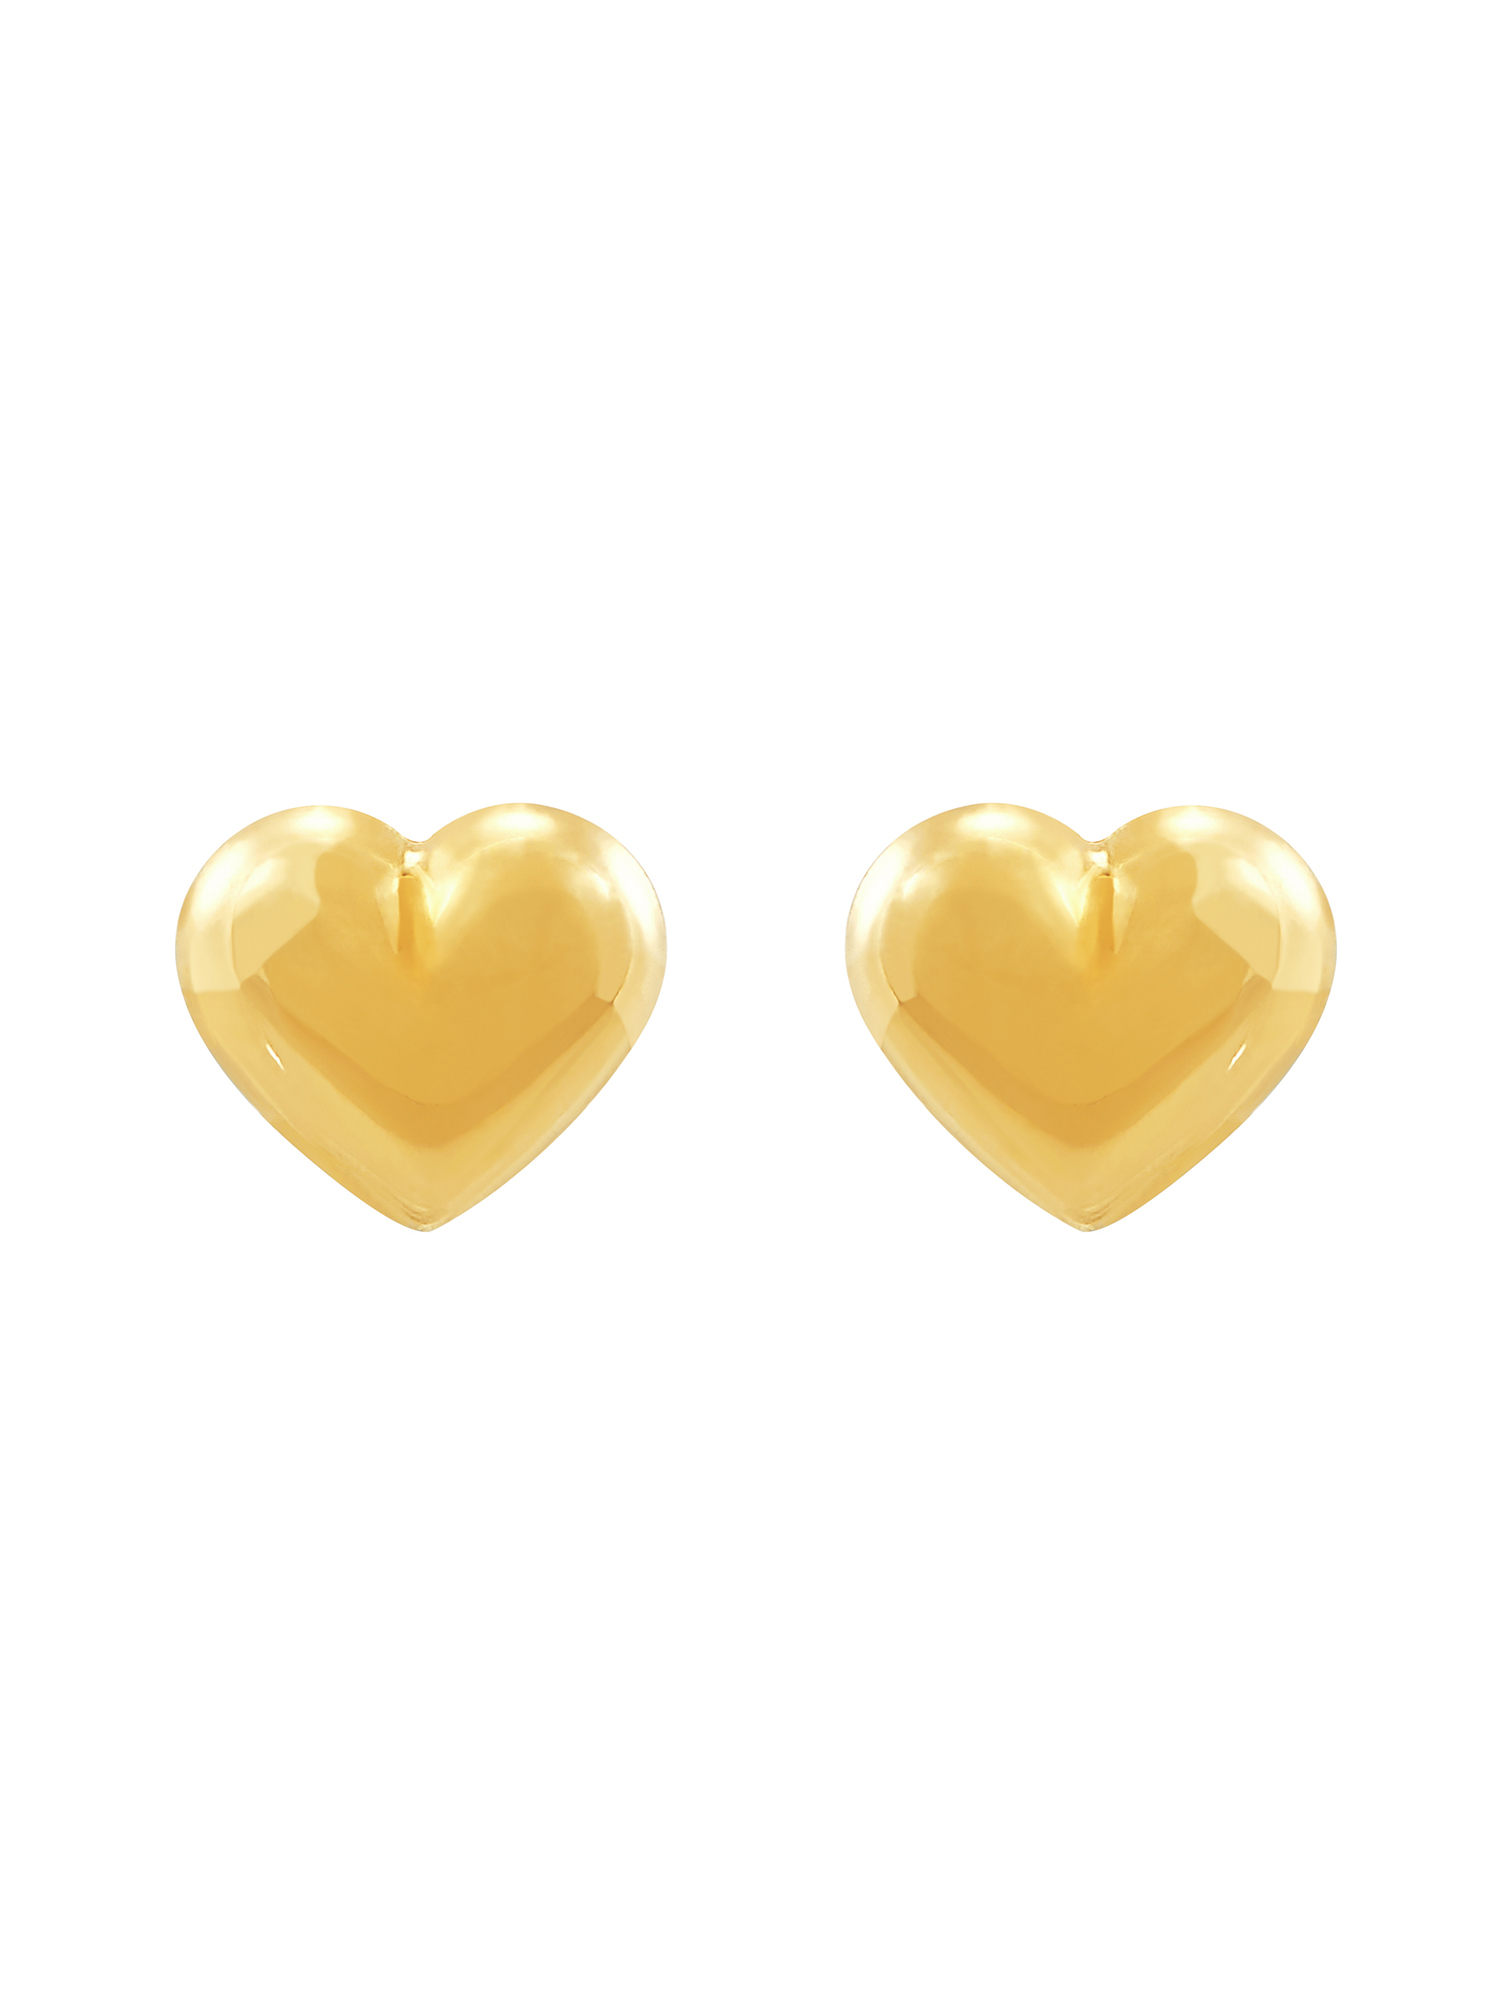 Brilliance Fine Jewelry 10K Yellow Gold Puffed Heart Stud with Safety Screw Back Earrings - image 2 of 4